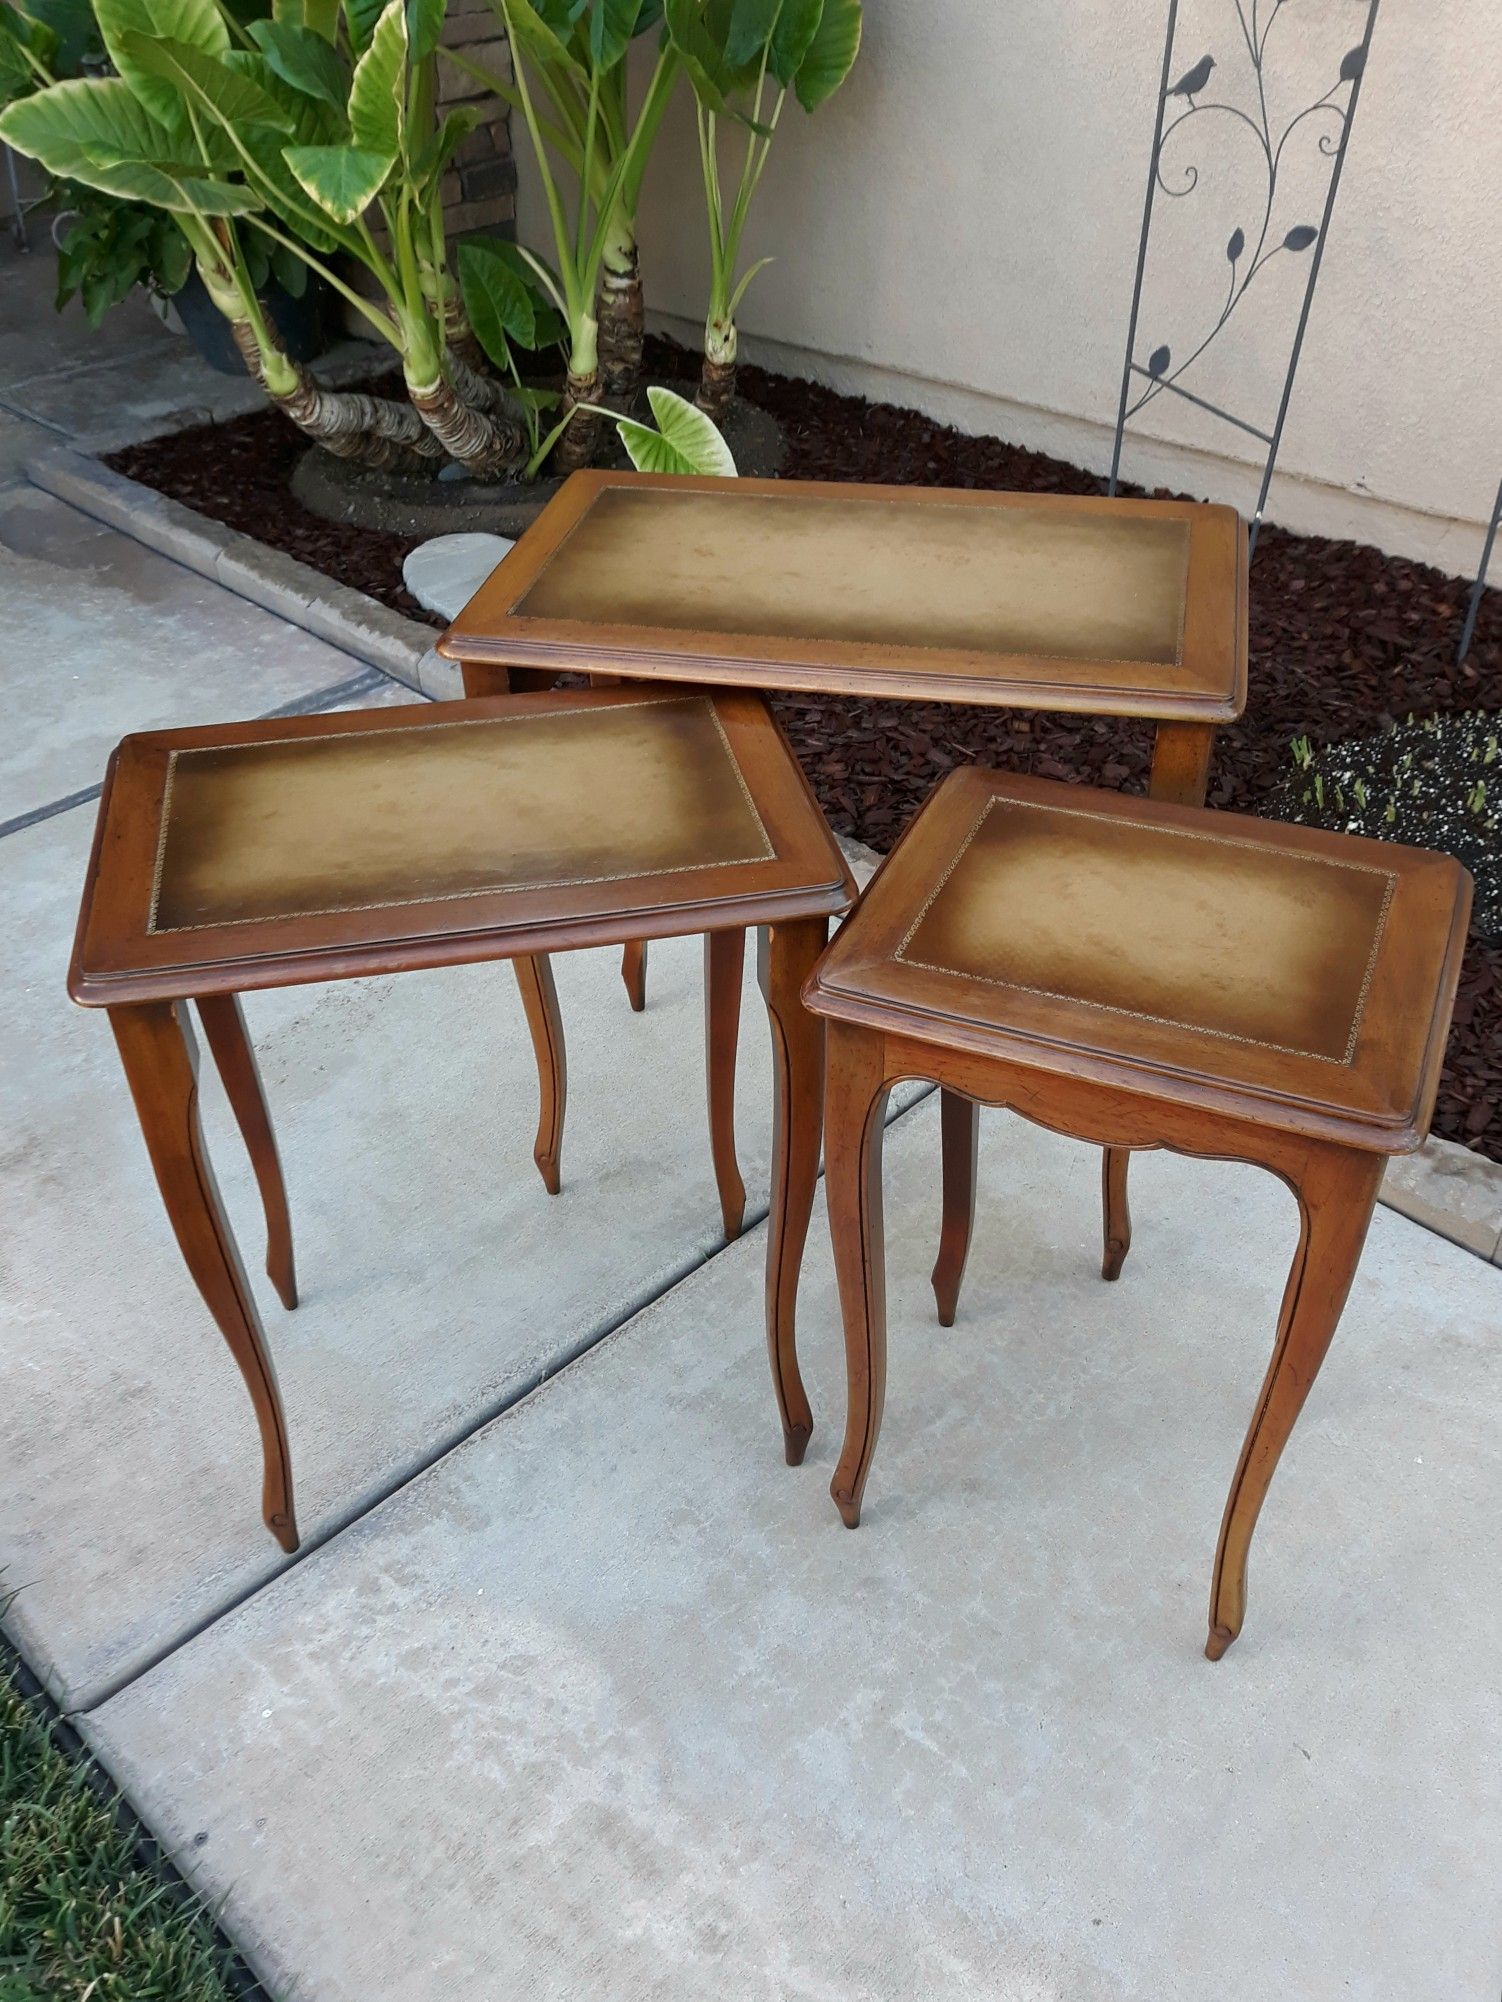 BEAUTIFUL VINTAGE 3PC. LEATHER INLAY TOPS NESTING TABLE SET